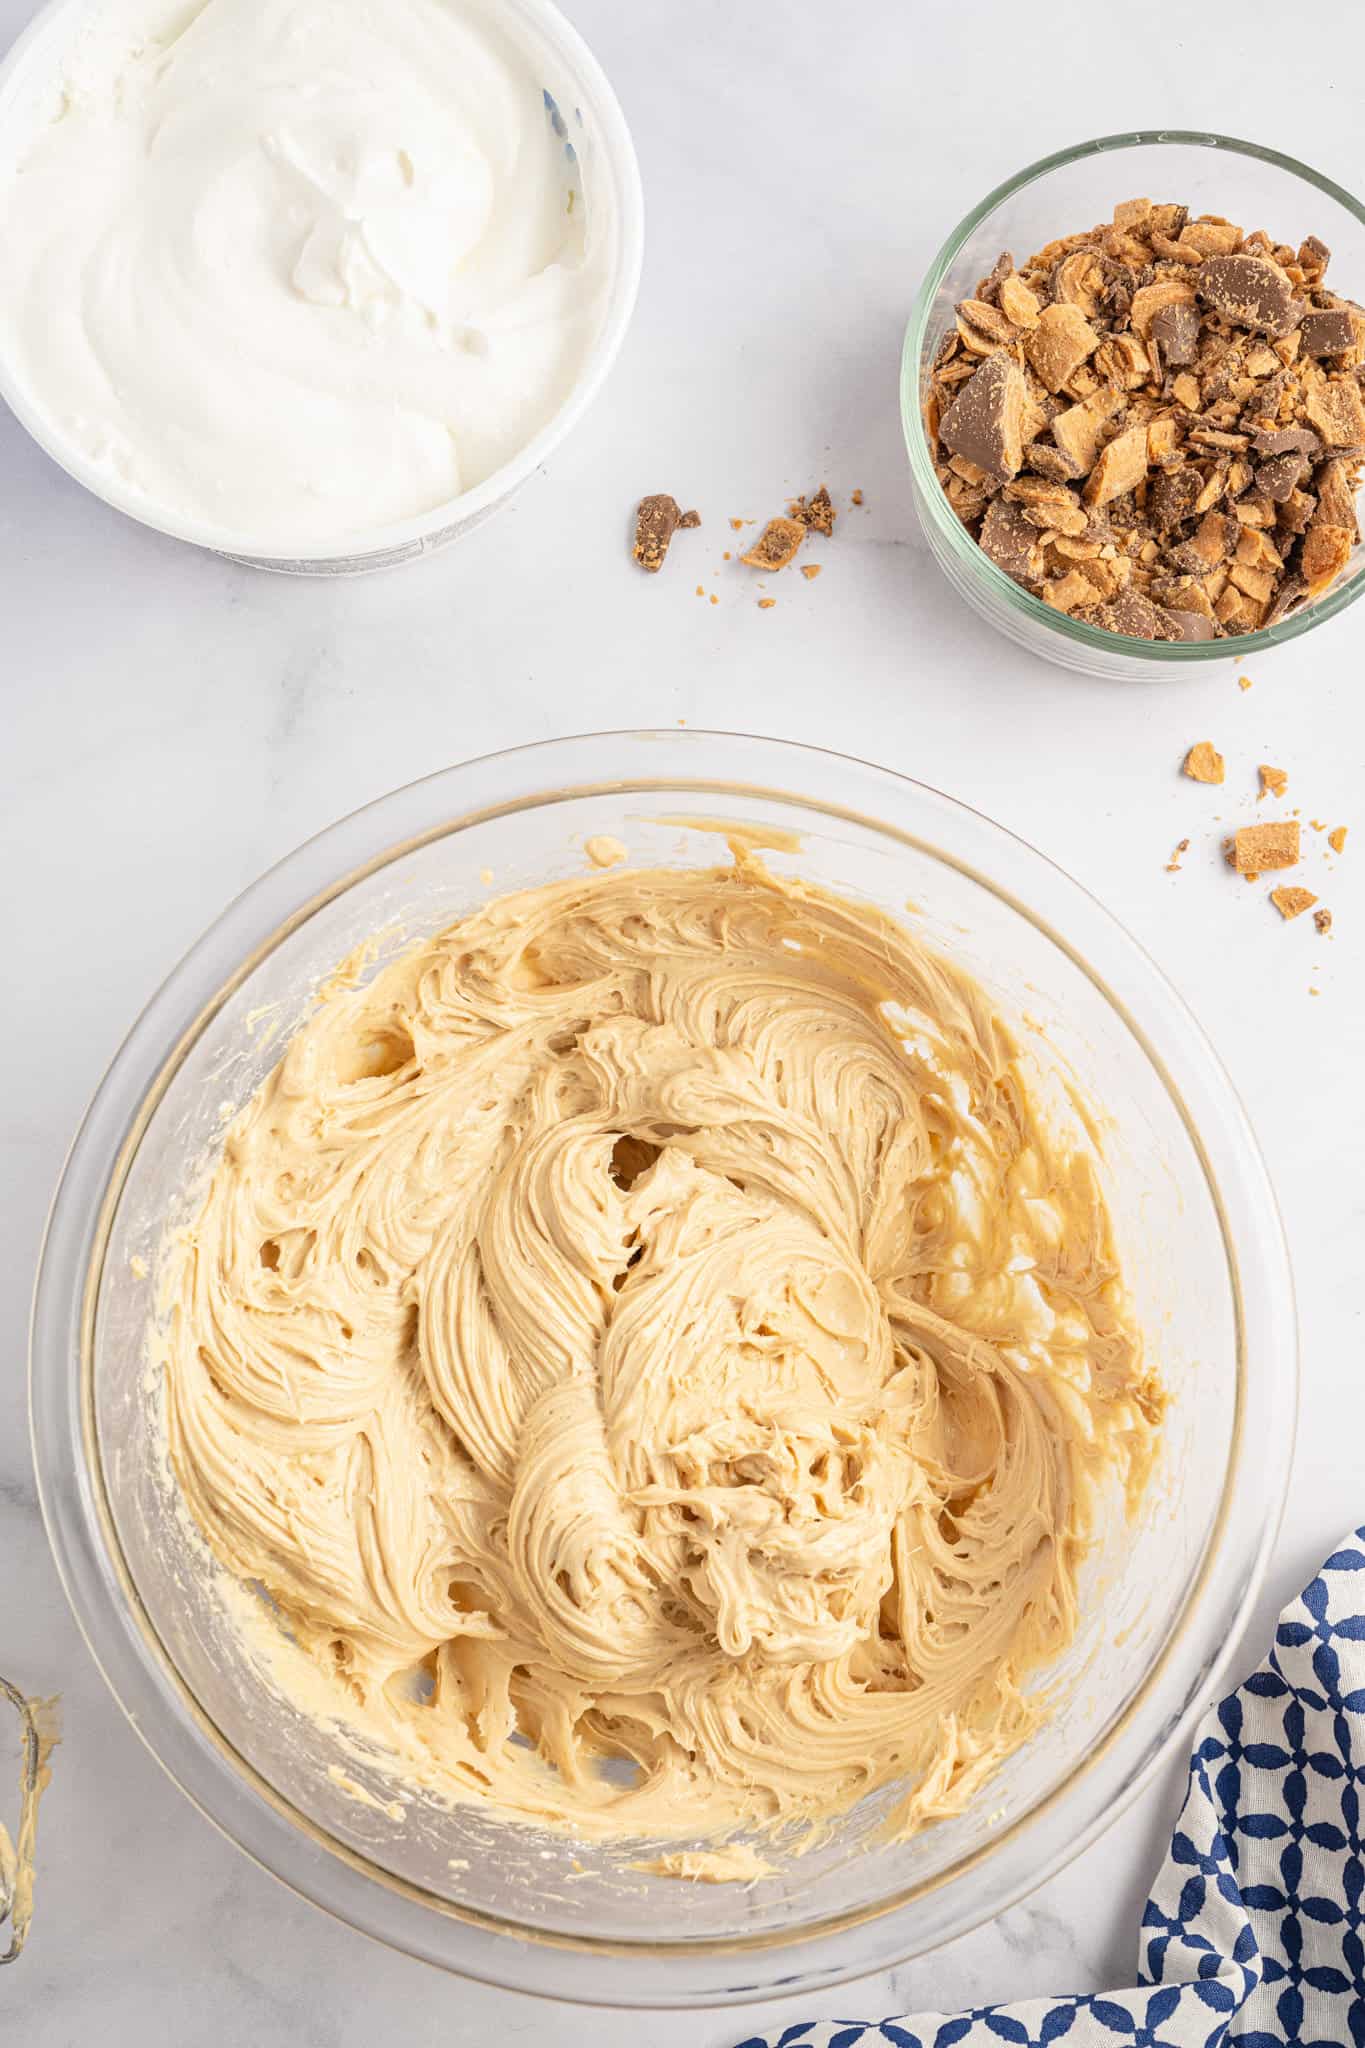 cream cheese and peanut butter mixture in a mixing bowl.